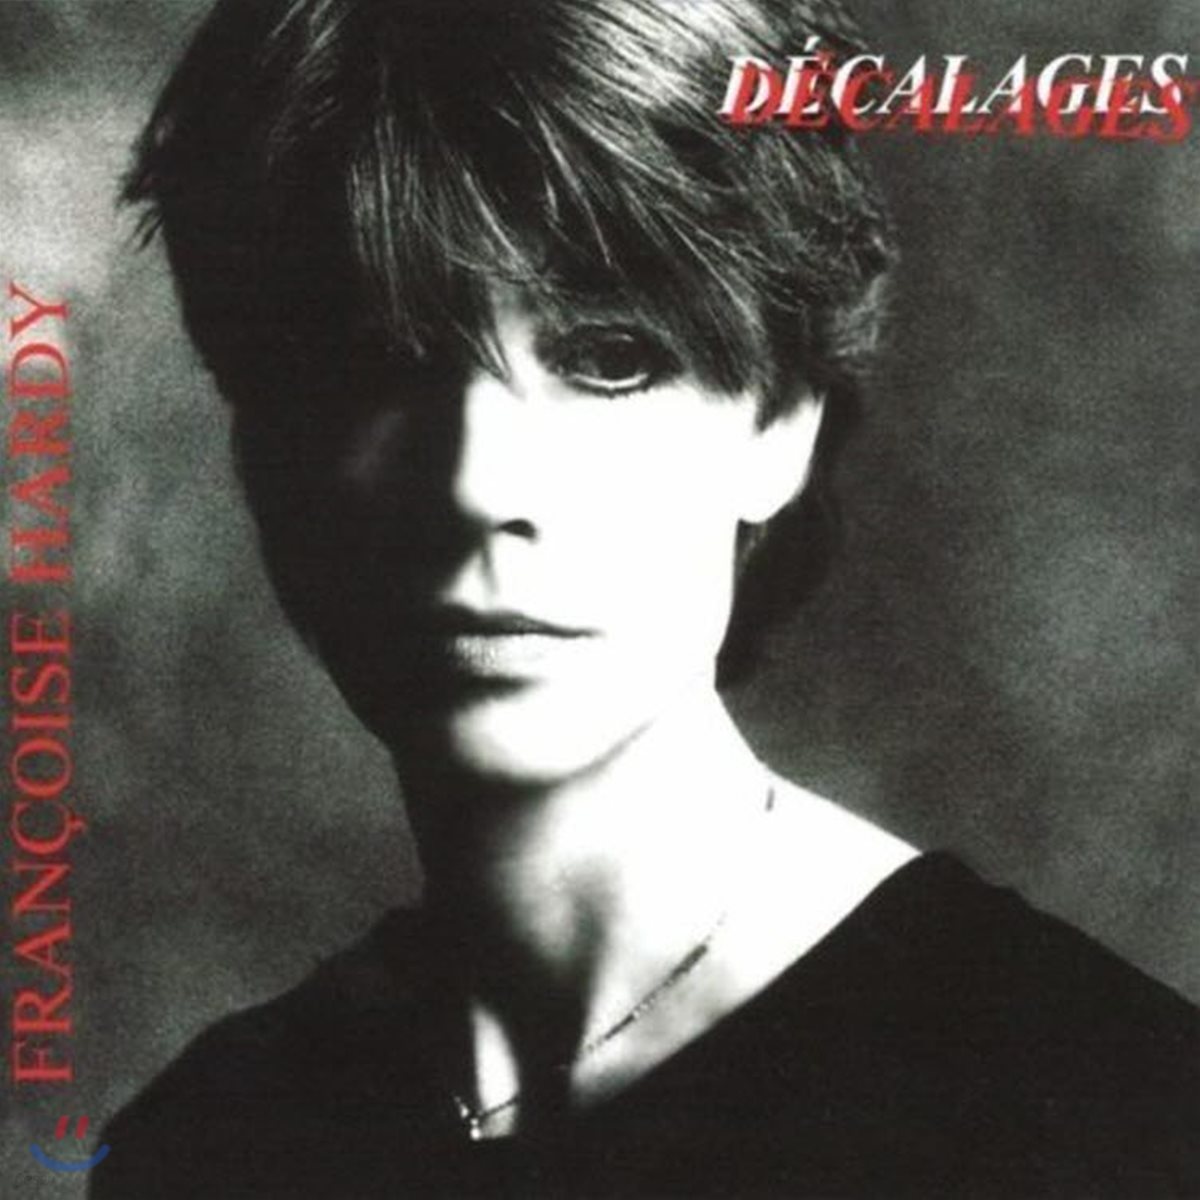 Francoise Hardy (프랑스와즈 아르디) - Decalages